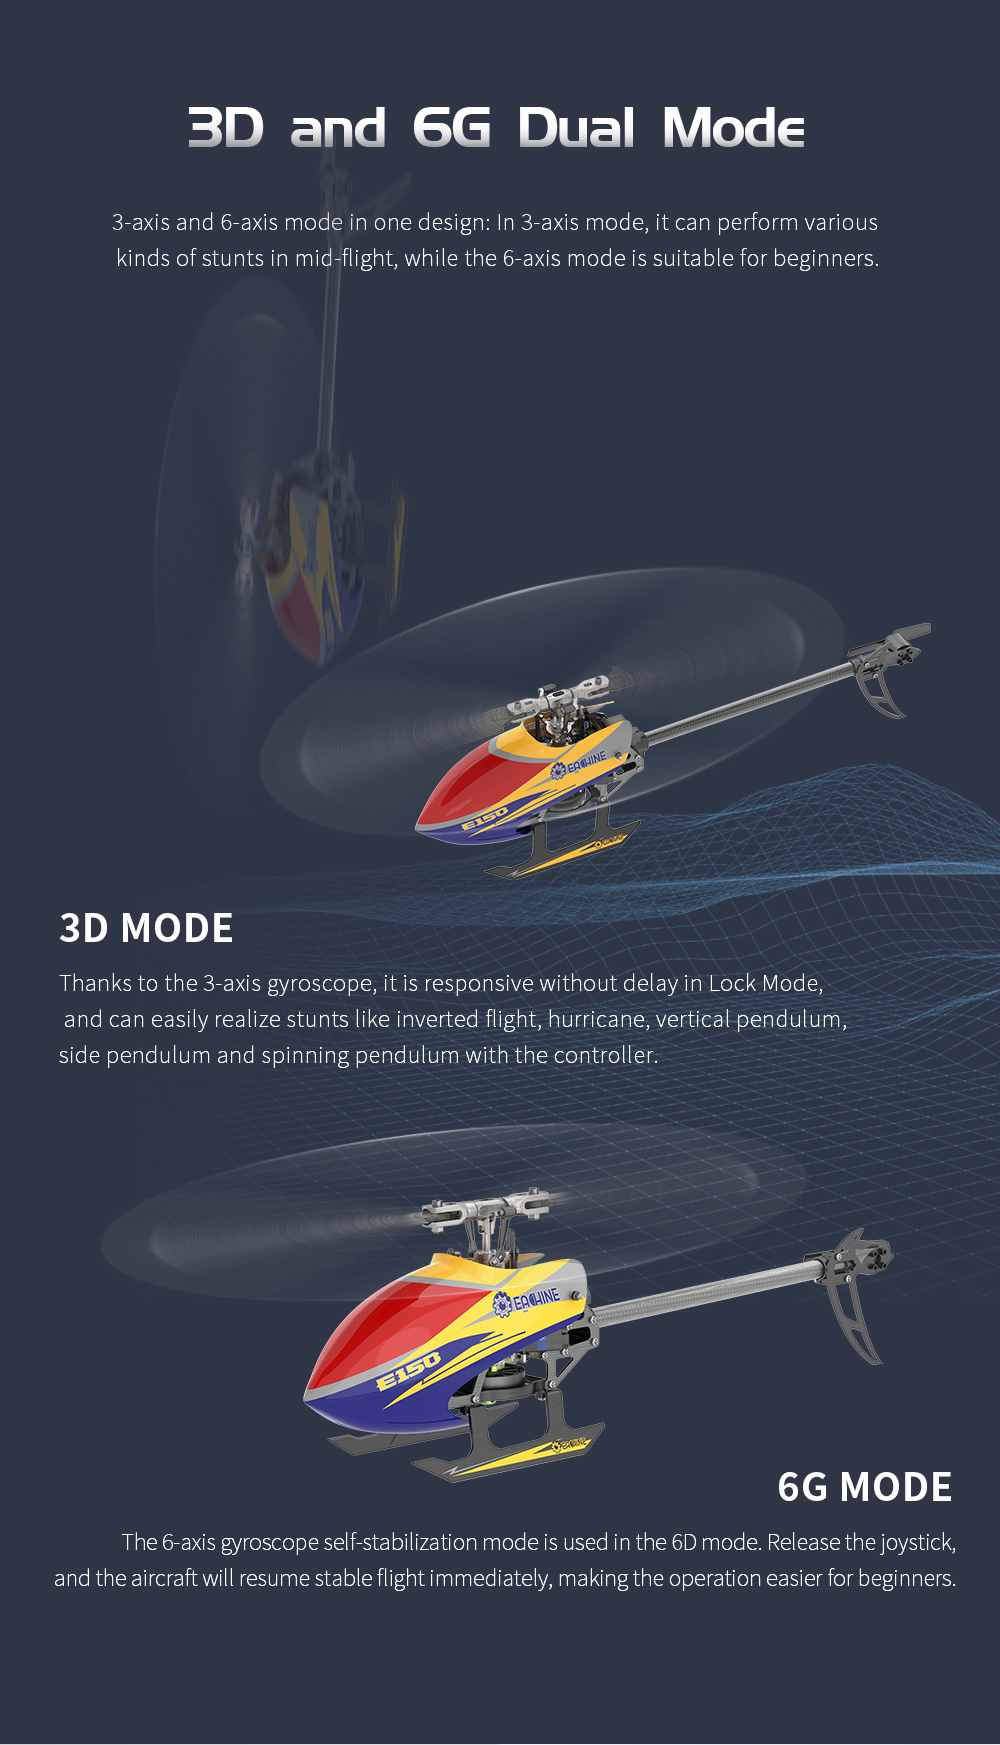 Eachine-E150-24G-6CH-6-Axis-Gyro-3D6G-Dual-Brushless-Direct-Drive-Motor-Flybarless-RC-Helicopter-BNF-1900365-8